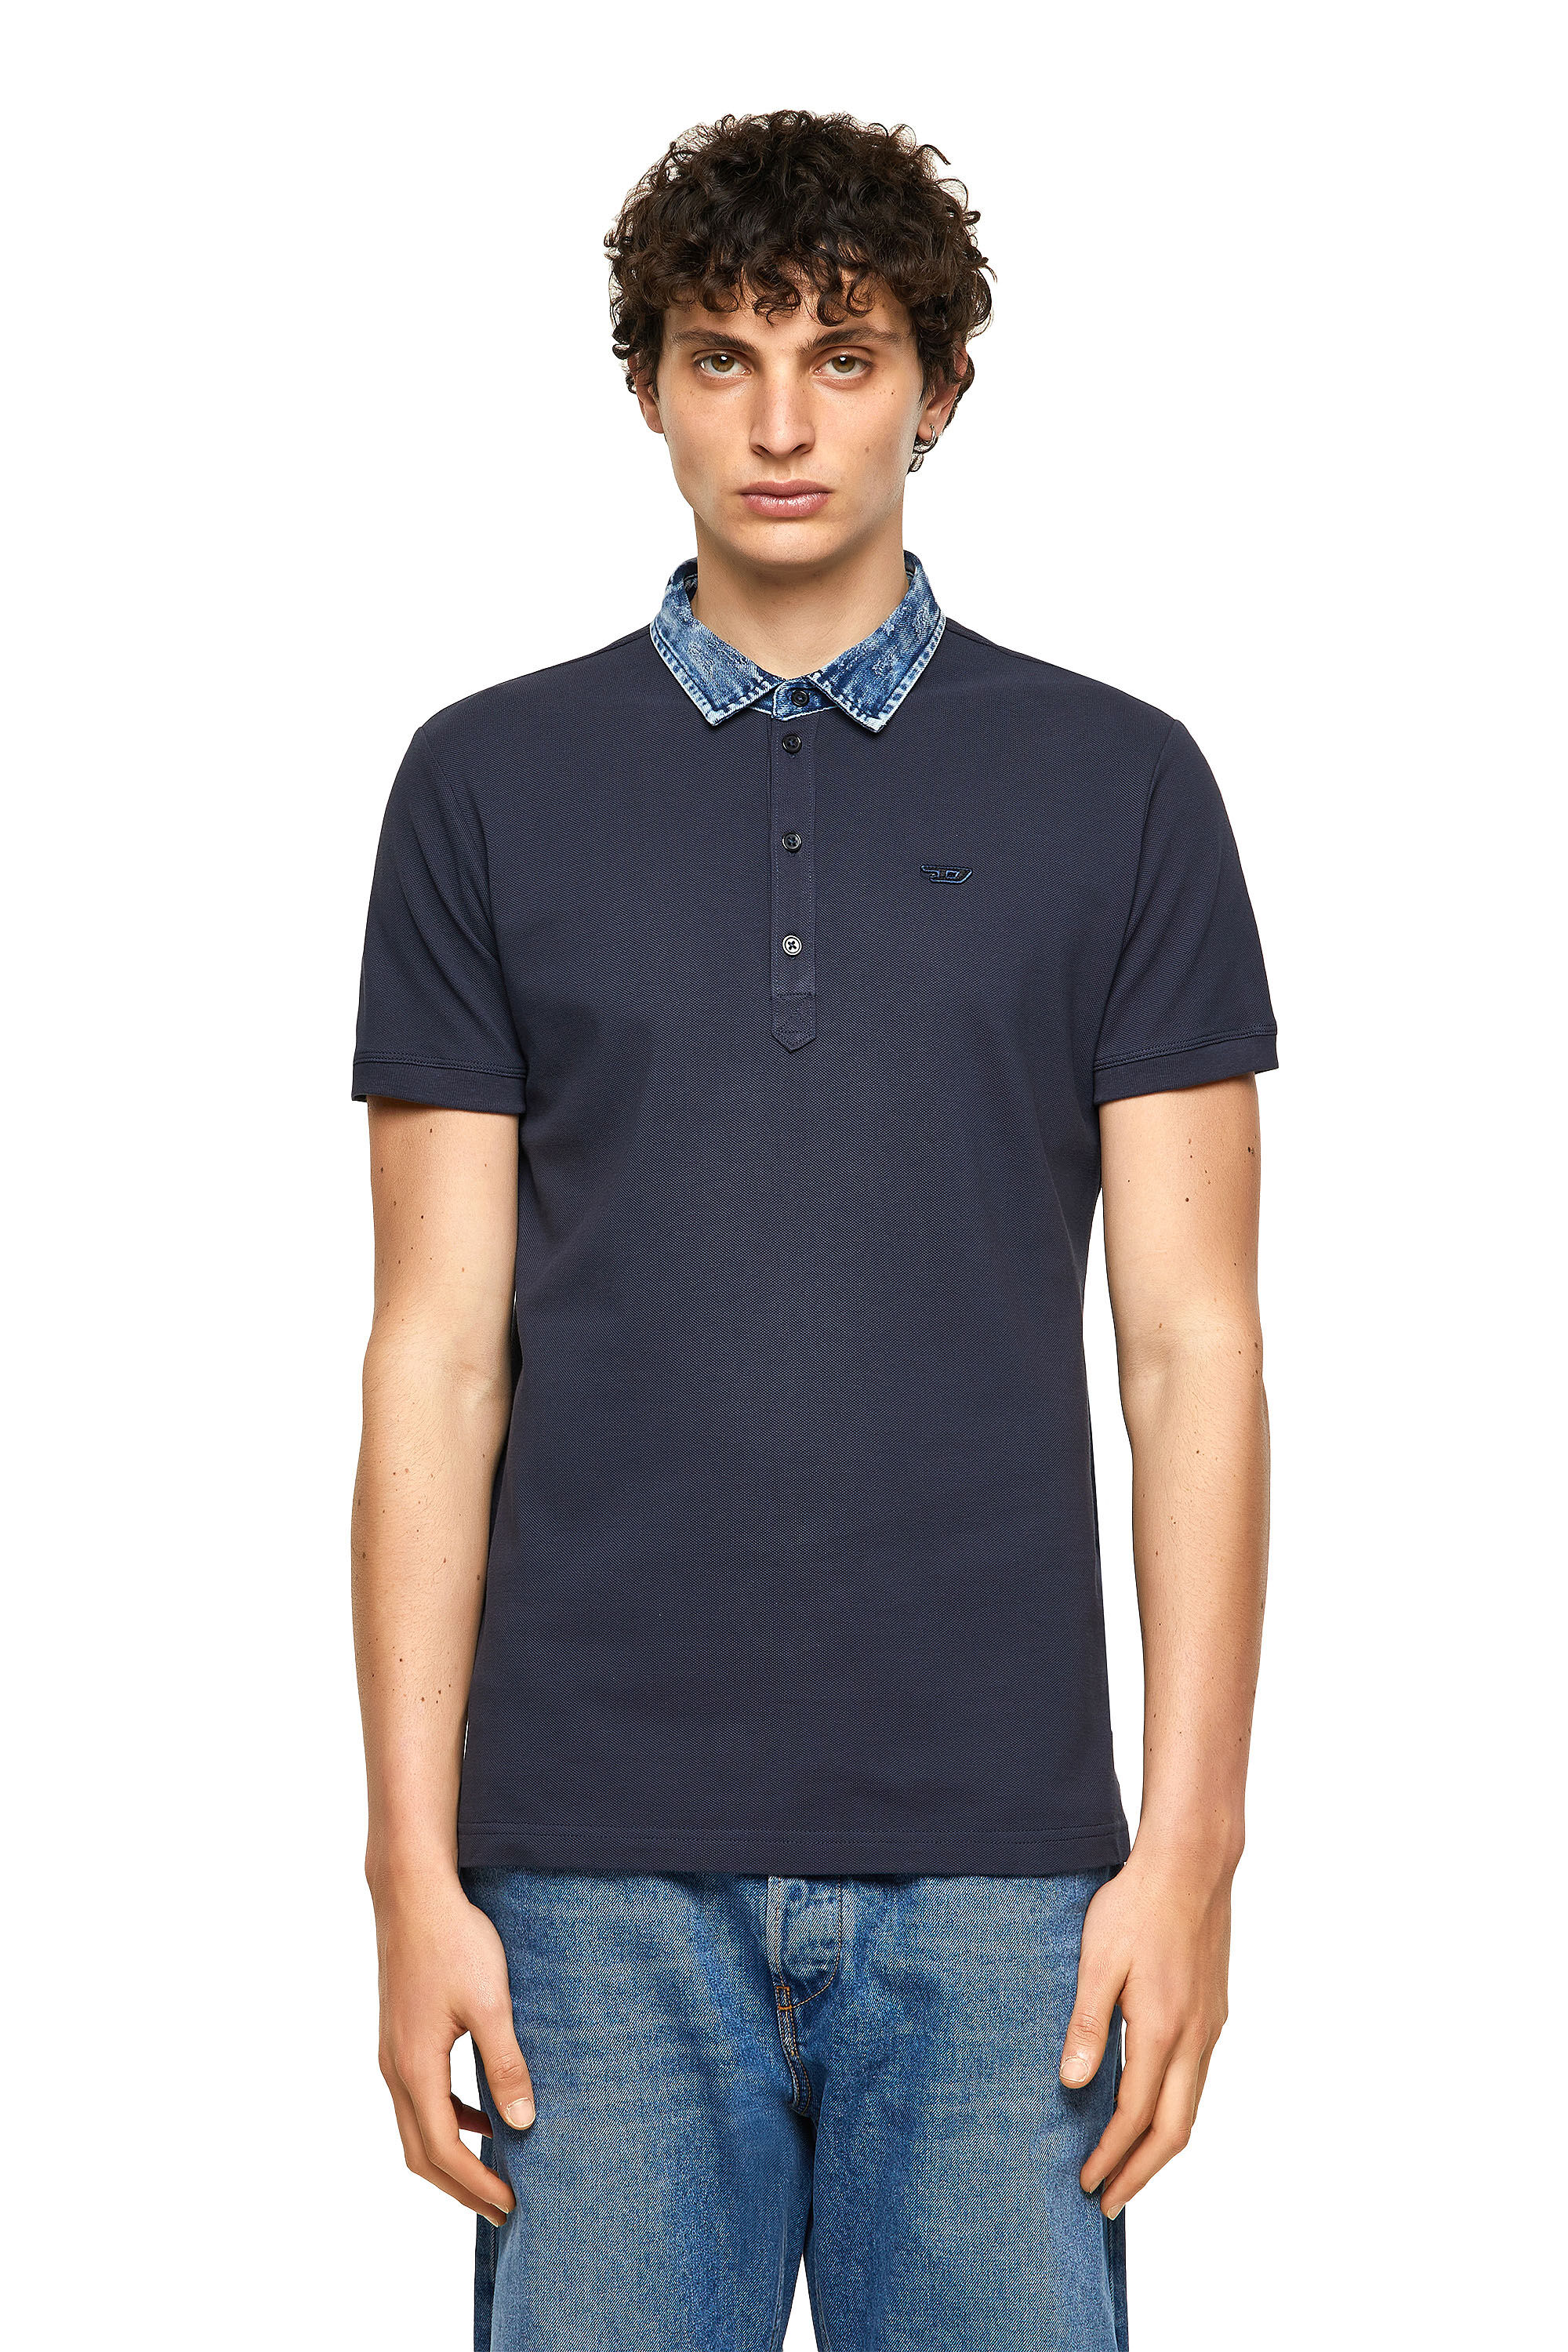 T-MILES-NEW Man: Polo shirt with denim collar | Diesel